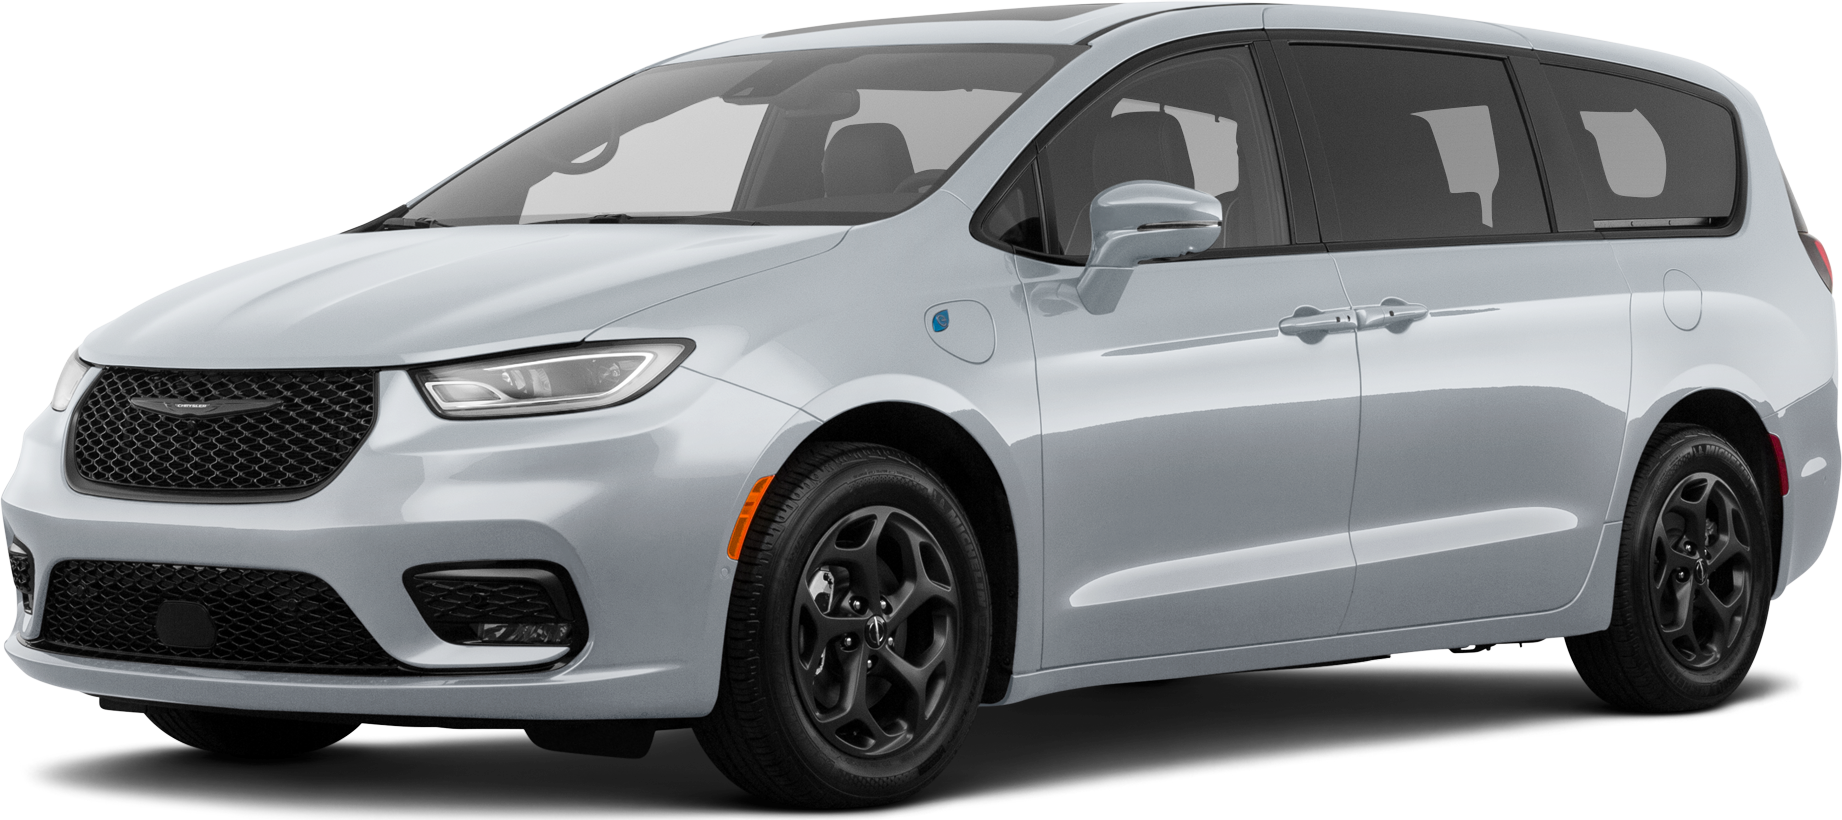 https://file.kelleybluebookimages.com/kbb/base/evox/CP/52202/2023-Chrysler-Pacifica%20Hybrid-front_52202_032_1842x820_PSE_cropped.png